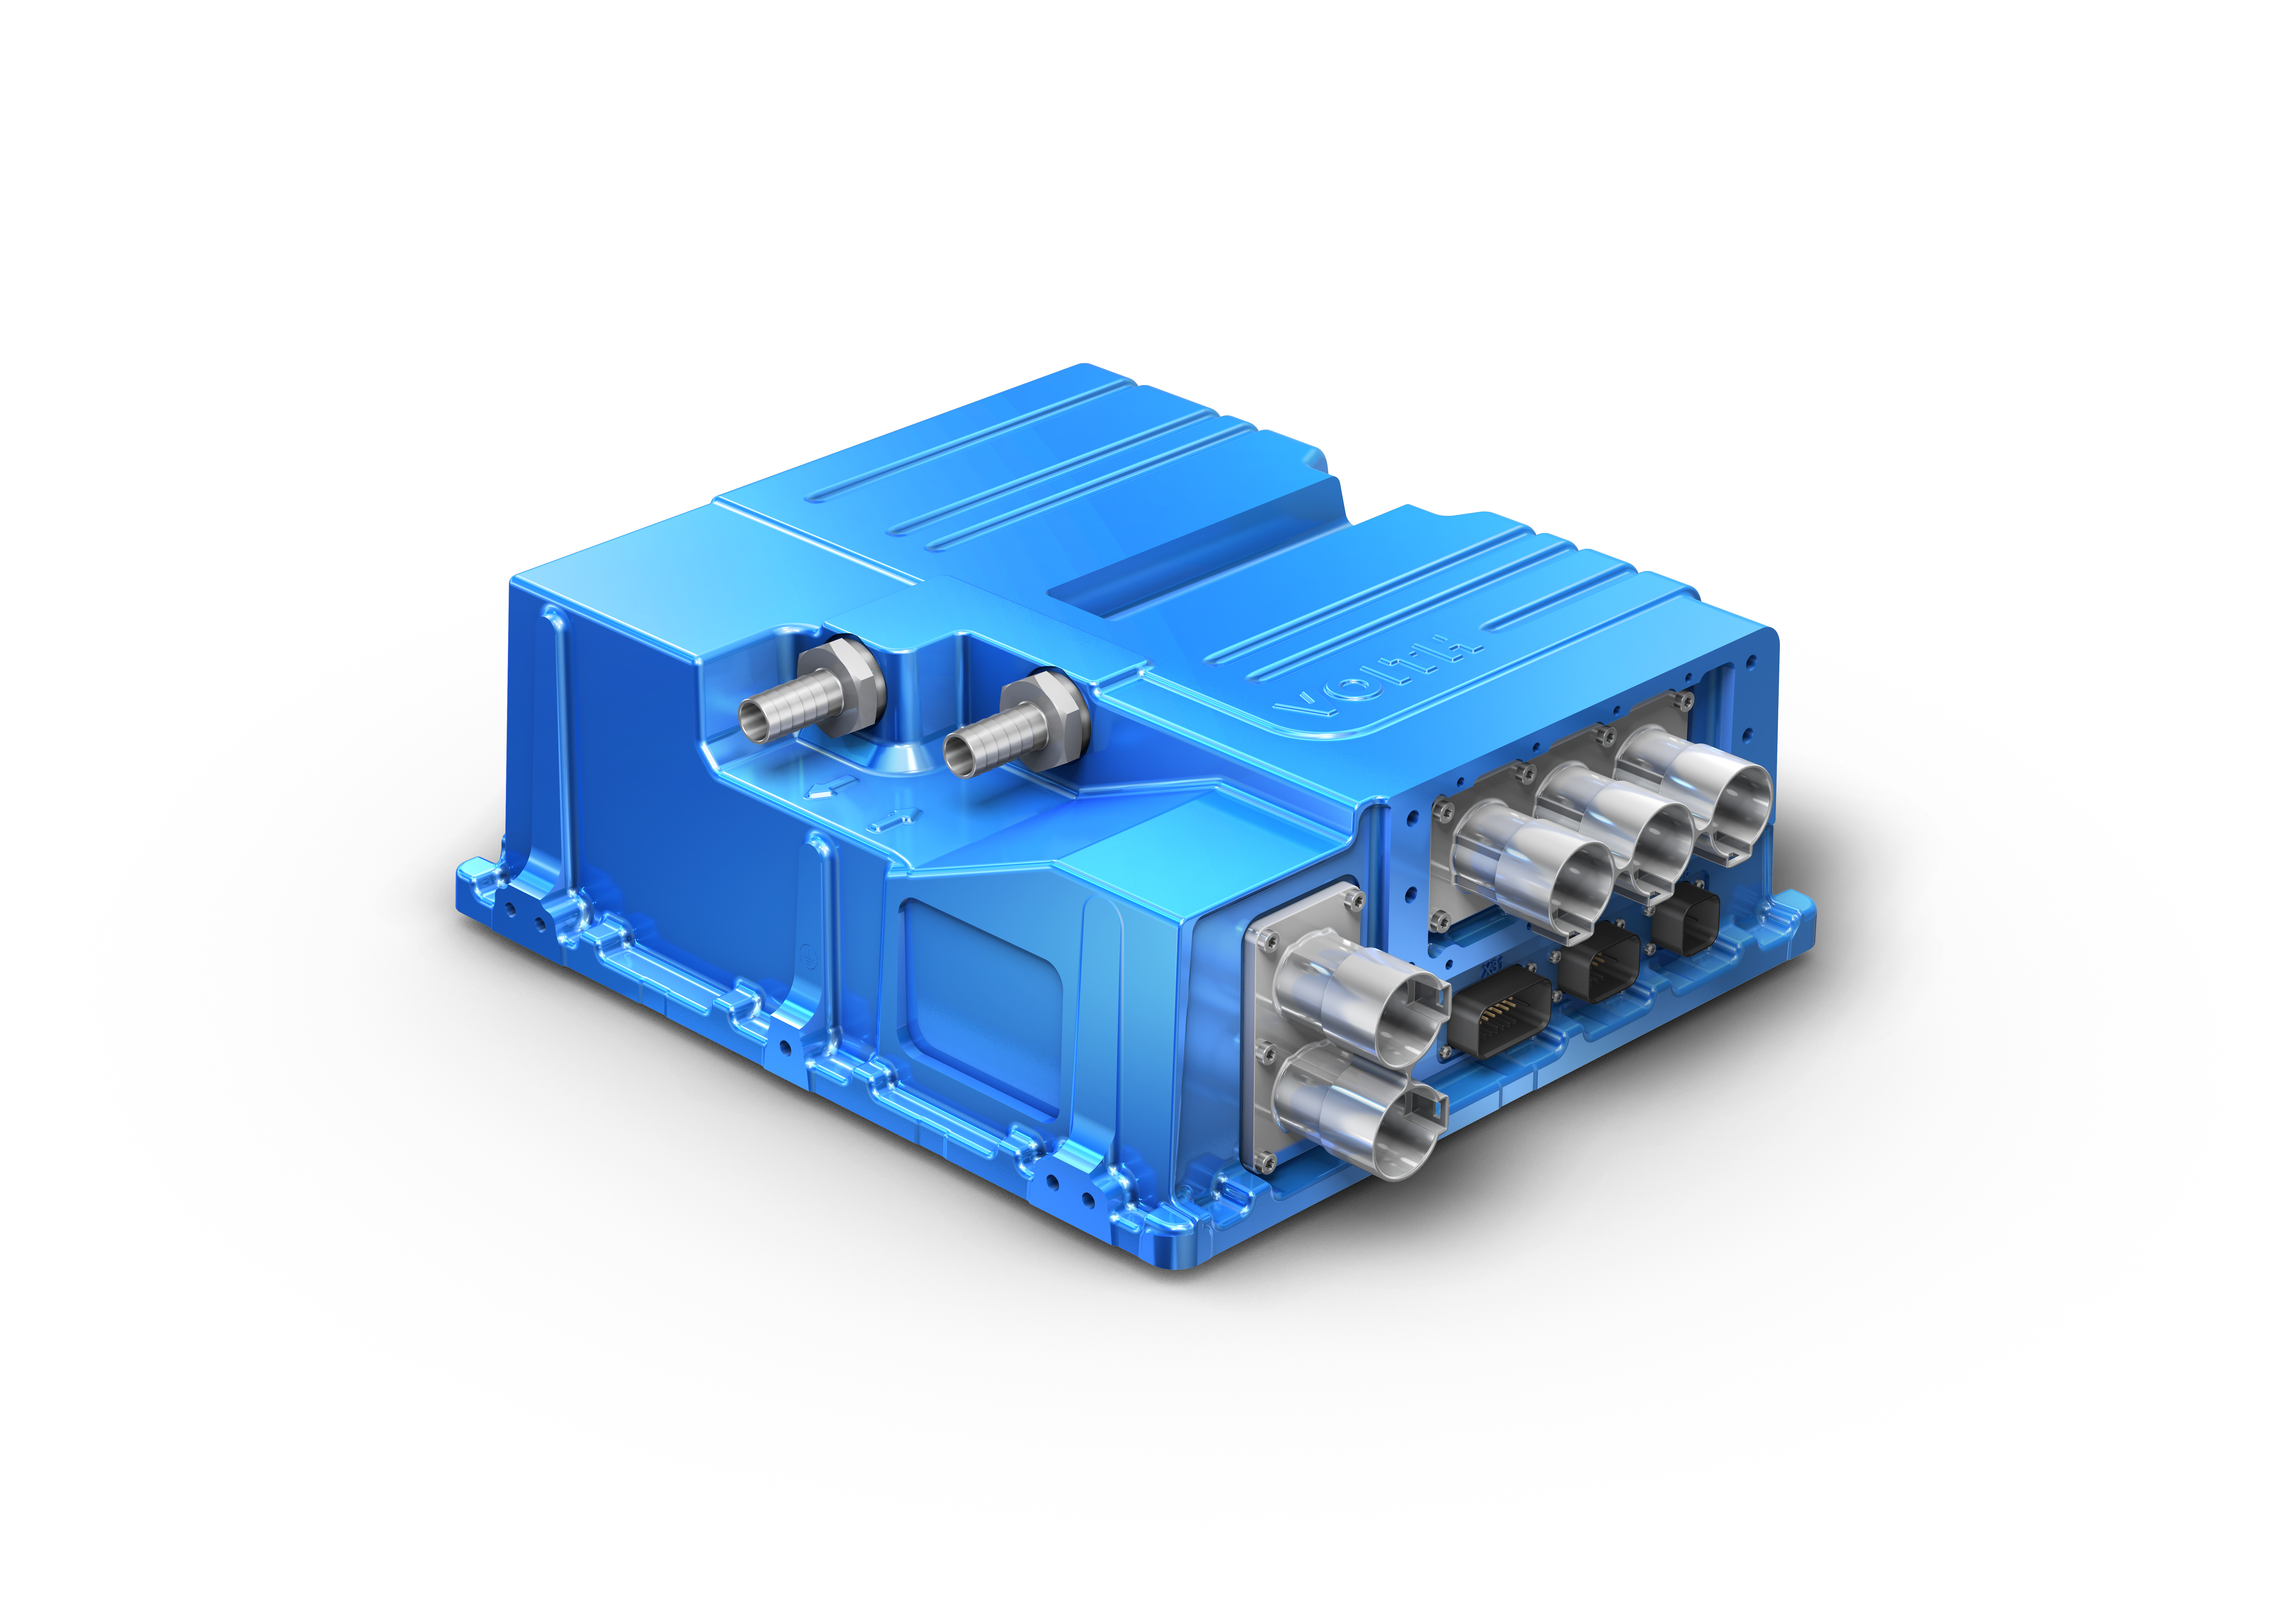 The compact and light Future Inverter Platform (FIP) has been specifically designed to meet the special requirements of the commercial vehicle segment and will be integrated into future generations of the VEDS. Fitted with cutting-edge microcontrollers, it meets the most stringent cyber security standards for the automotive industry.